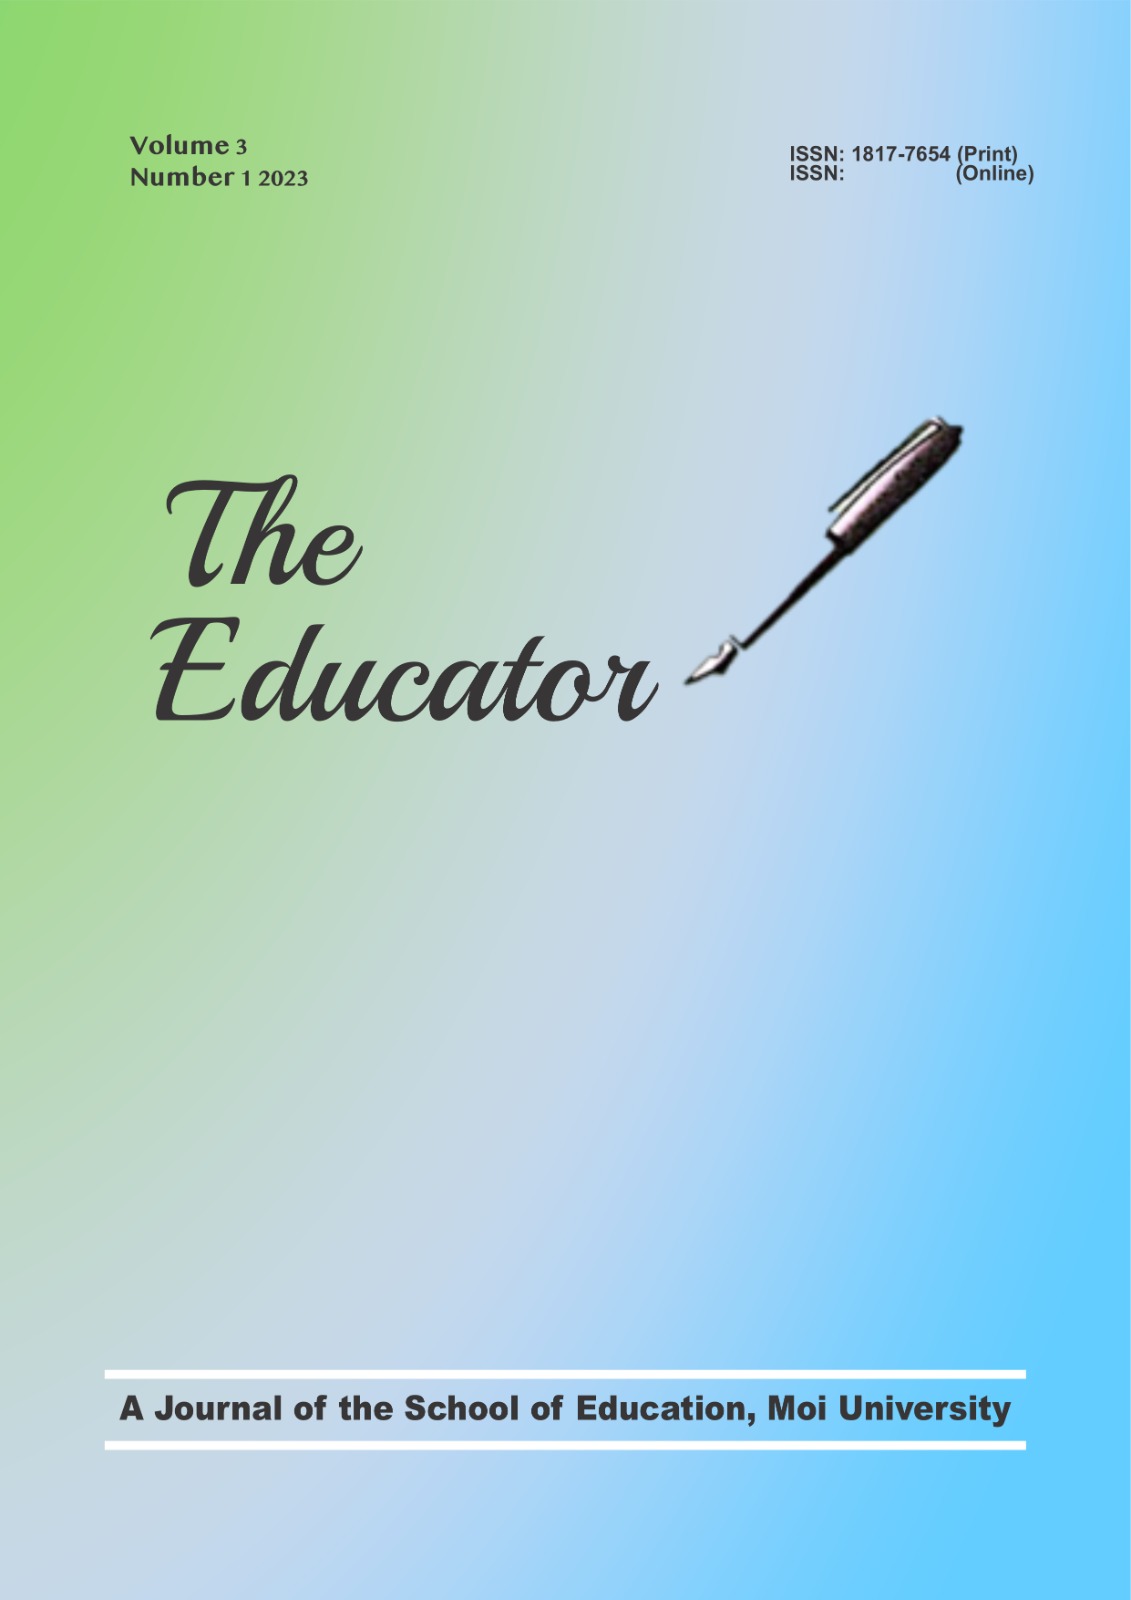 					View Vol. 3 No. 1 (2023): The Educator: A Journal of the School of Education, Moi University
				